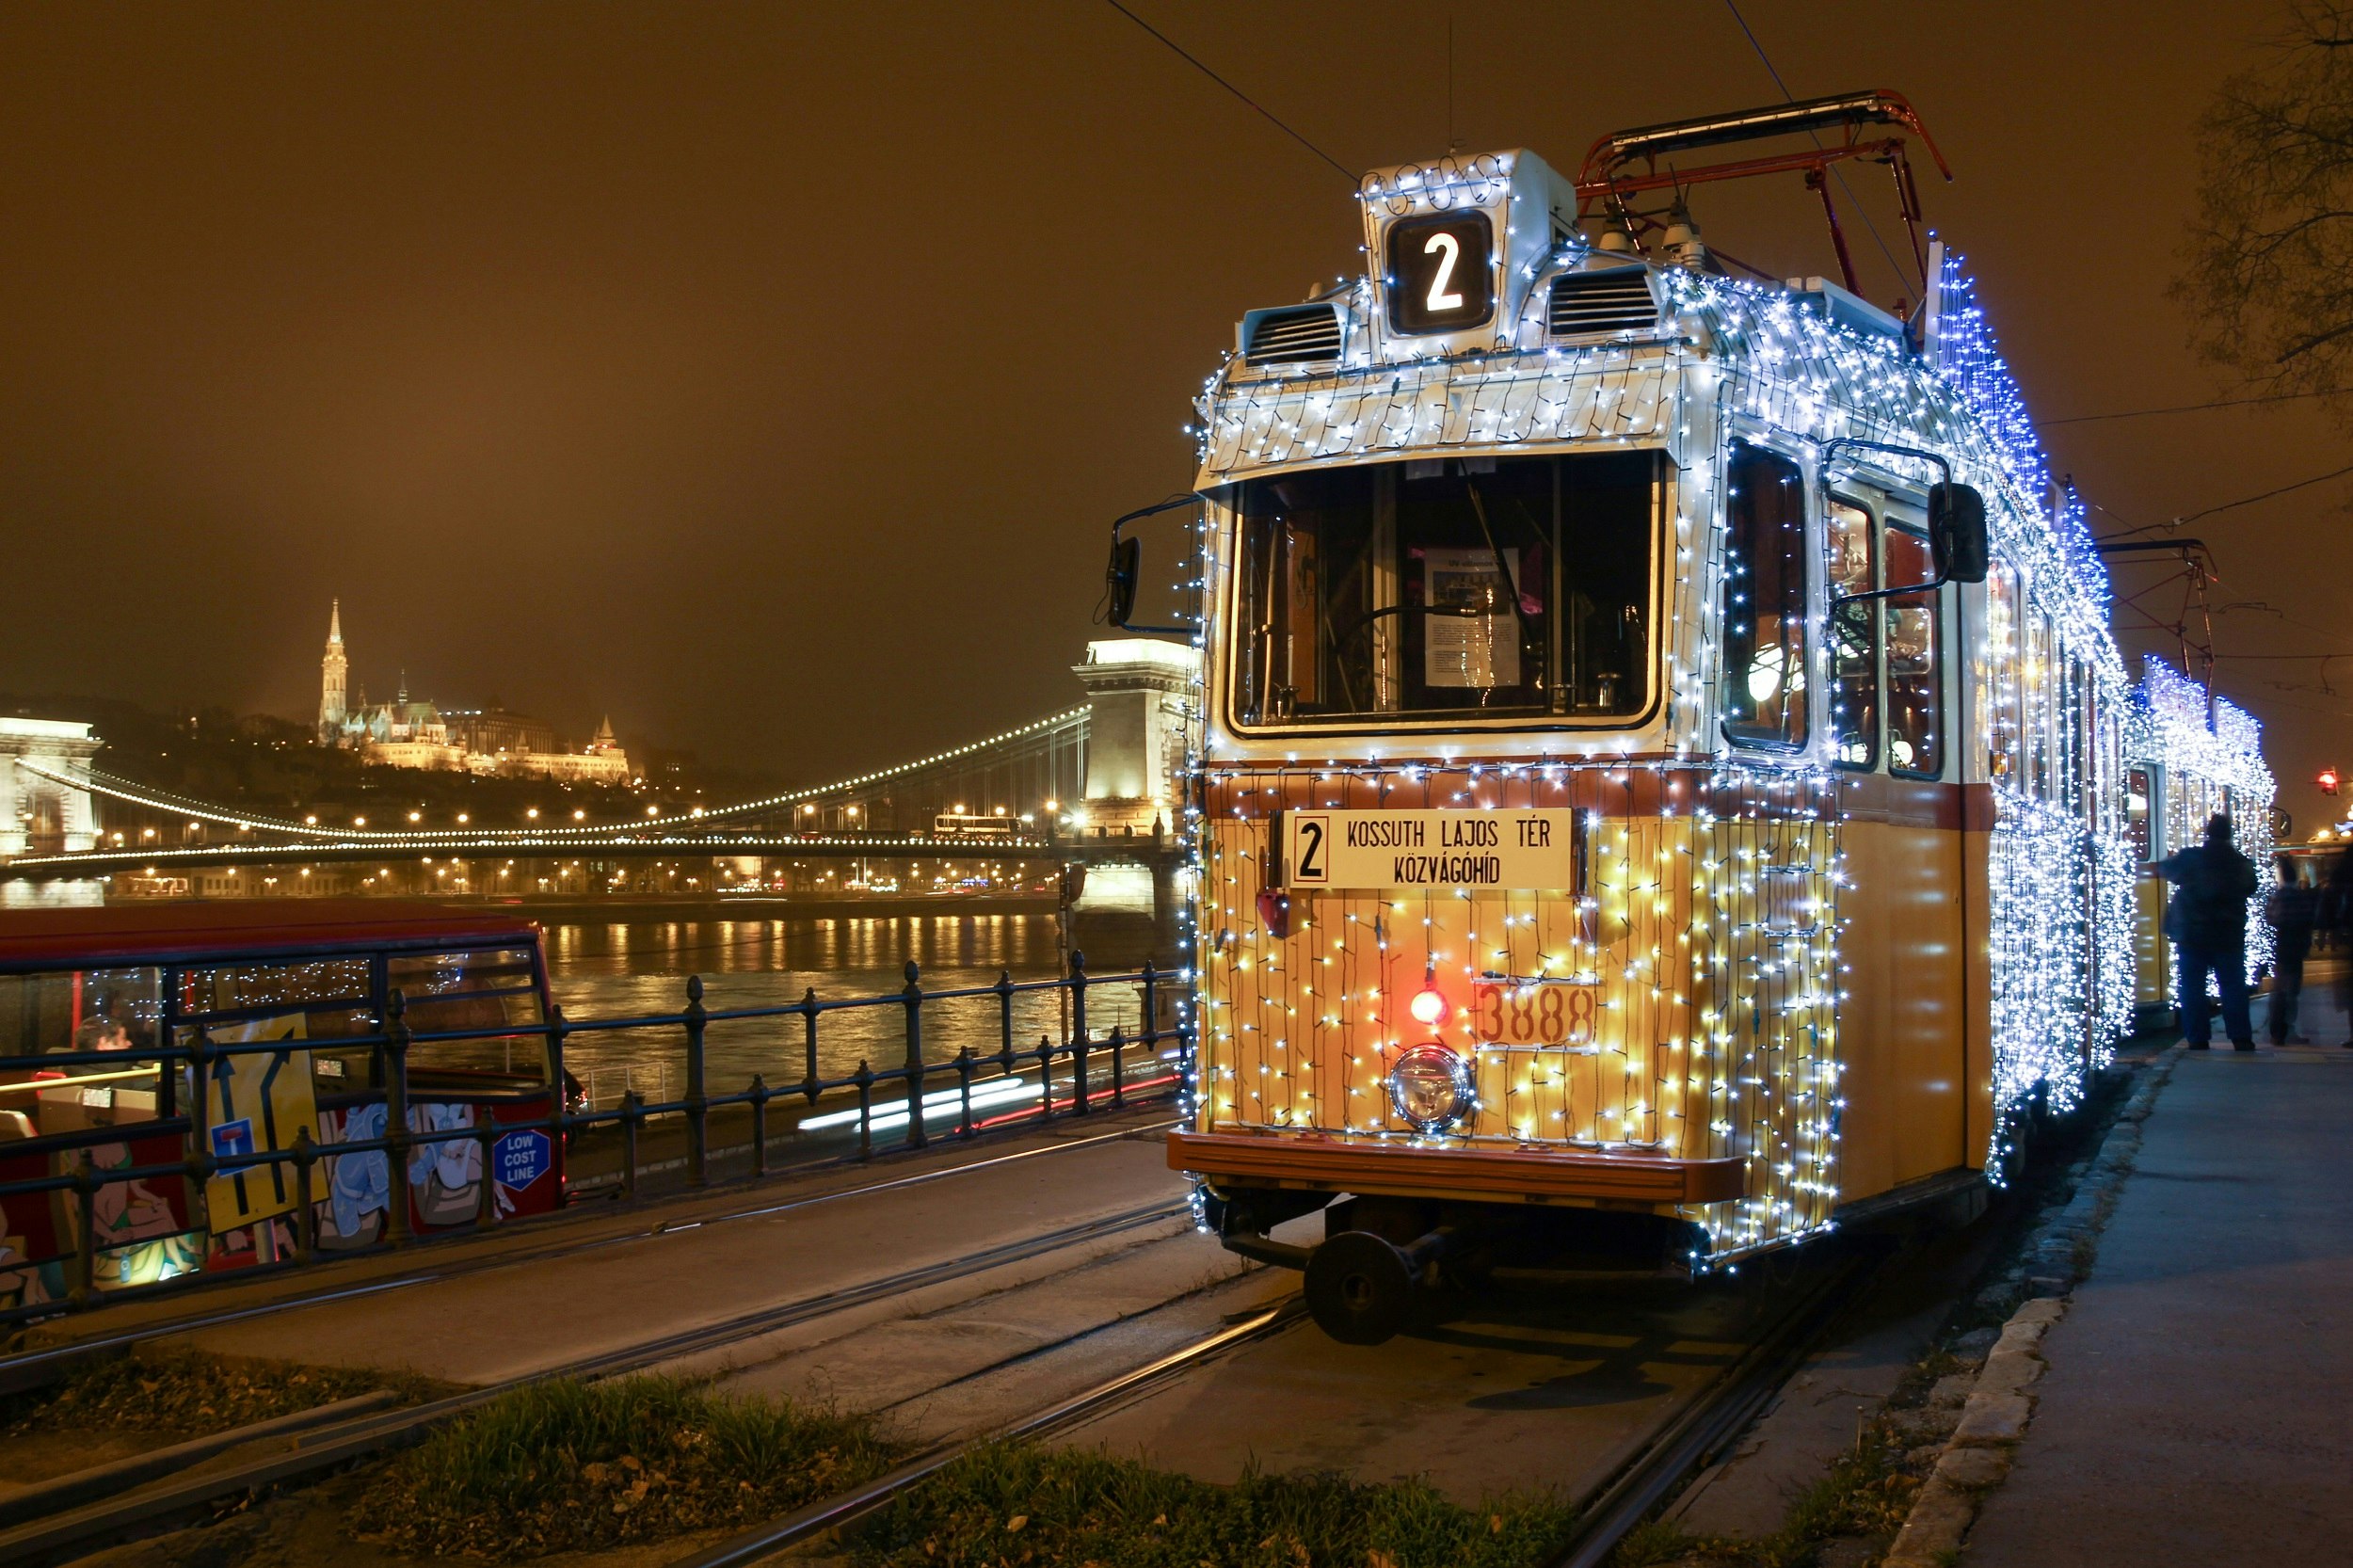 A shot from the front of a tram covered in small white and blue lights, stopped near the river